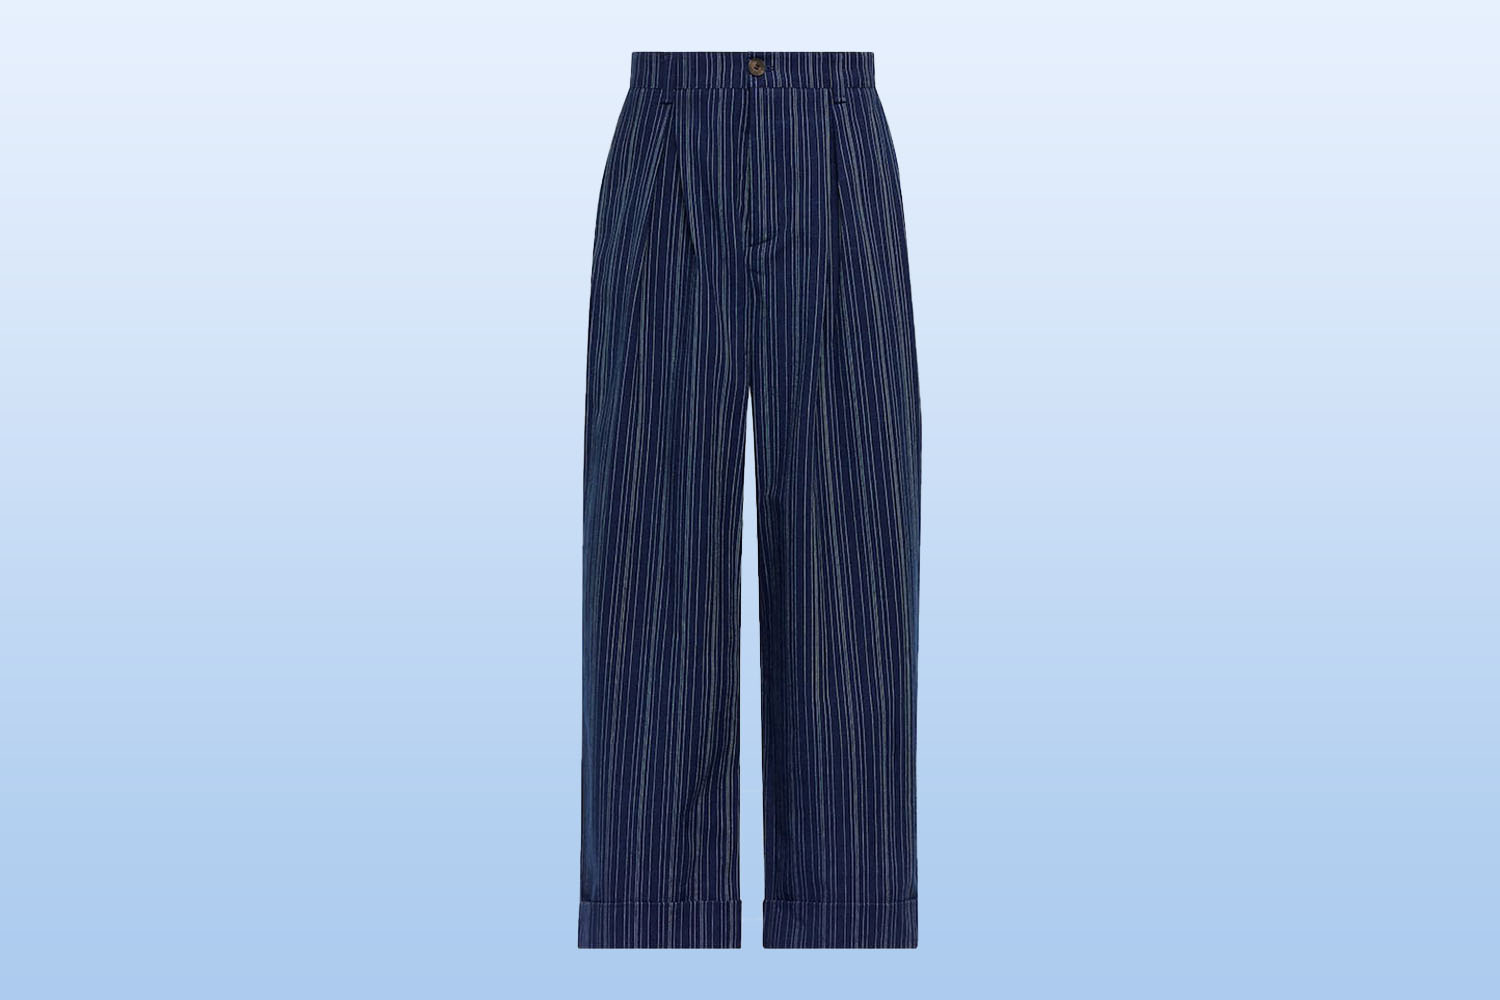 a pair of relaxed blue pants from mytheresa on a light blue background